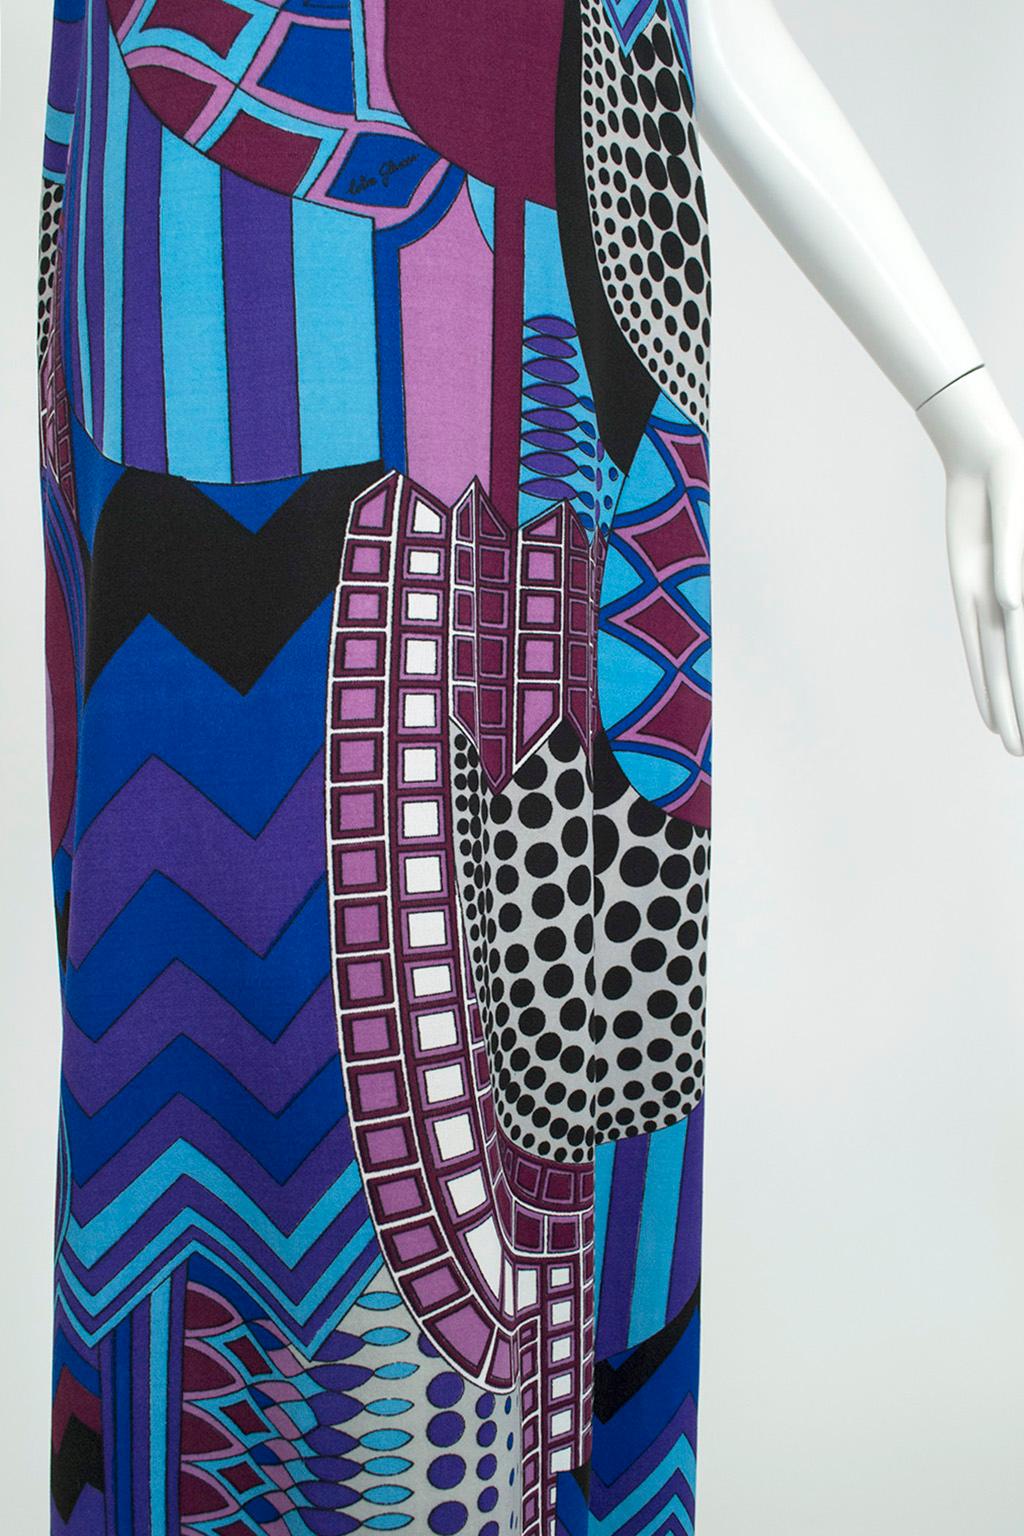 Signed Colin Glascoe Blue Abstract Stained Glass Midi Halter Dress - M, 1970s For Sale 3